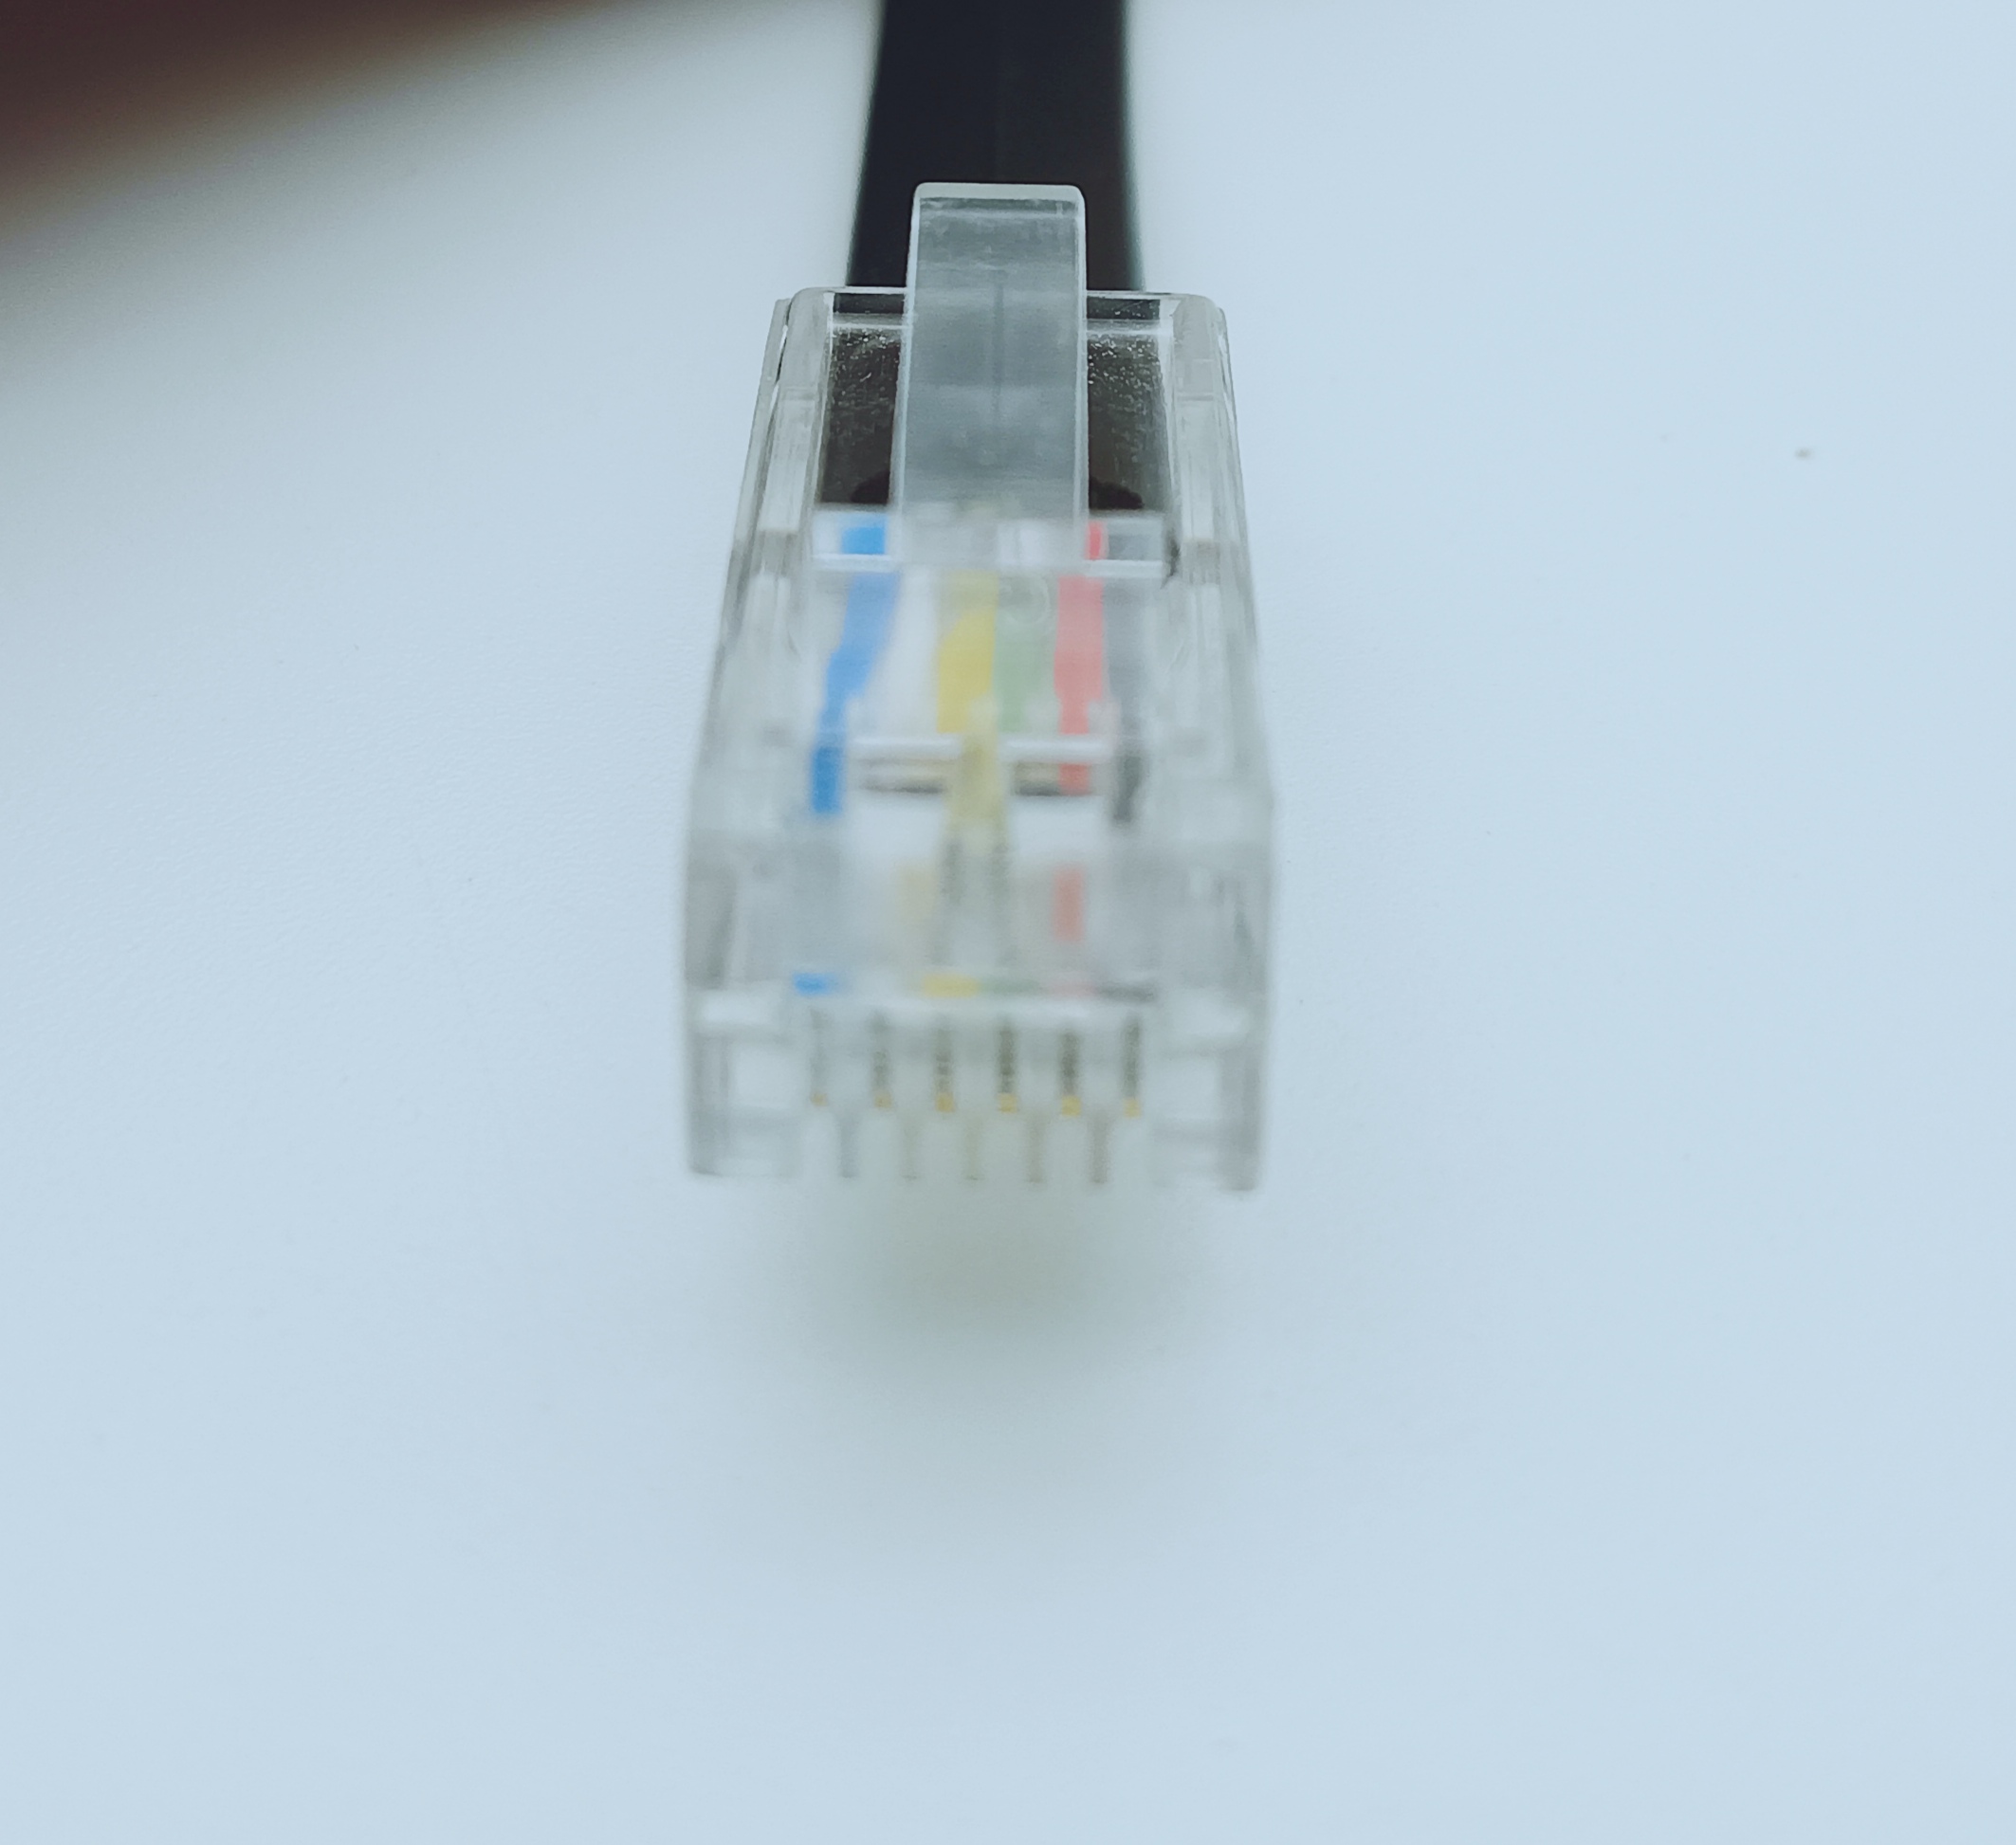 RJ12 6p6c Telephone Extension Flat Cable Crystal Head Cable Male to Female Wire with Coupler